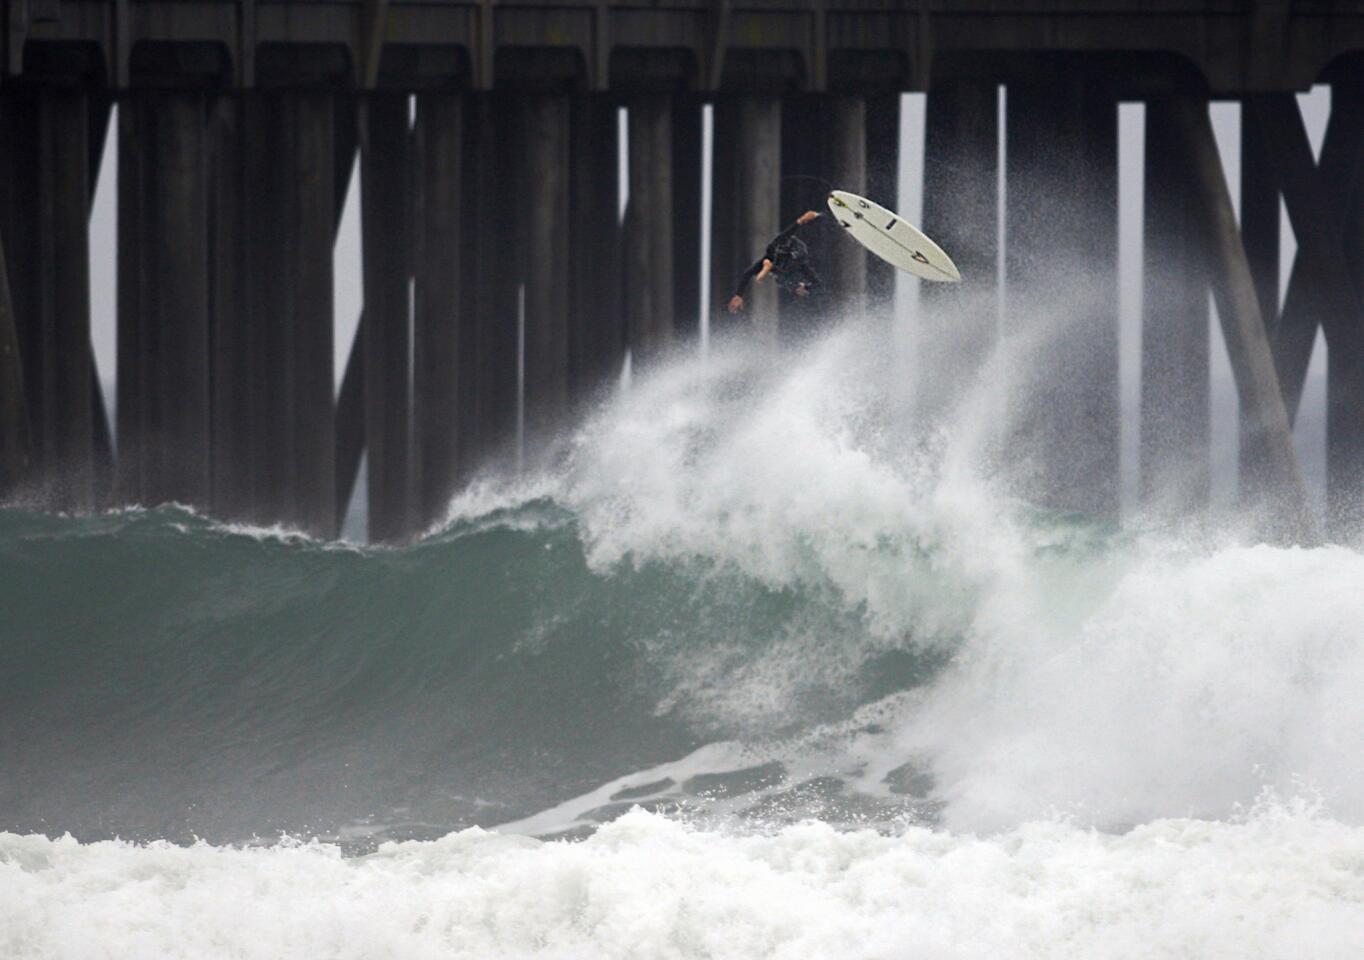 Amid light rain, a surfer bails out after riding a big wave in Huntington Beach.